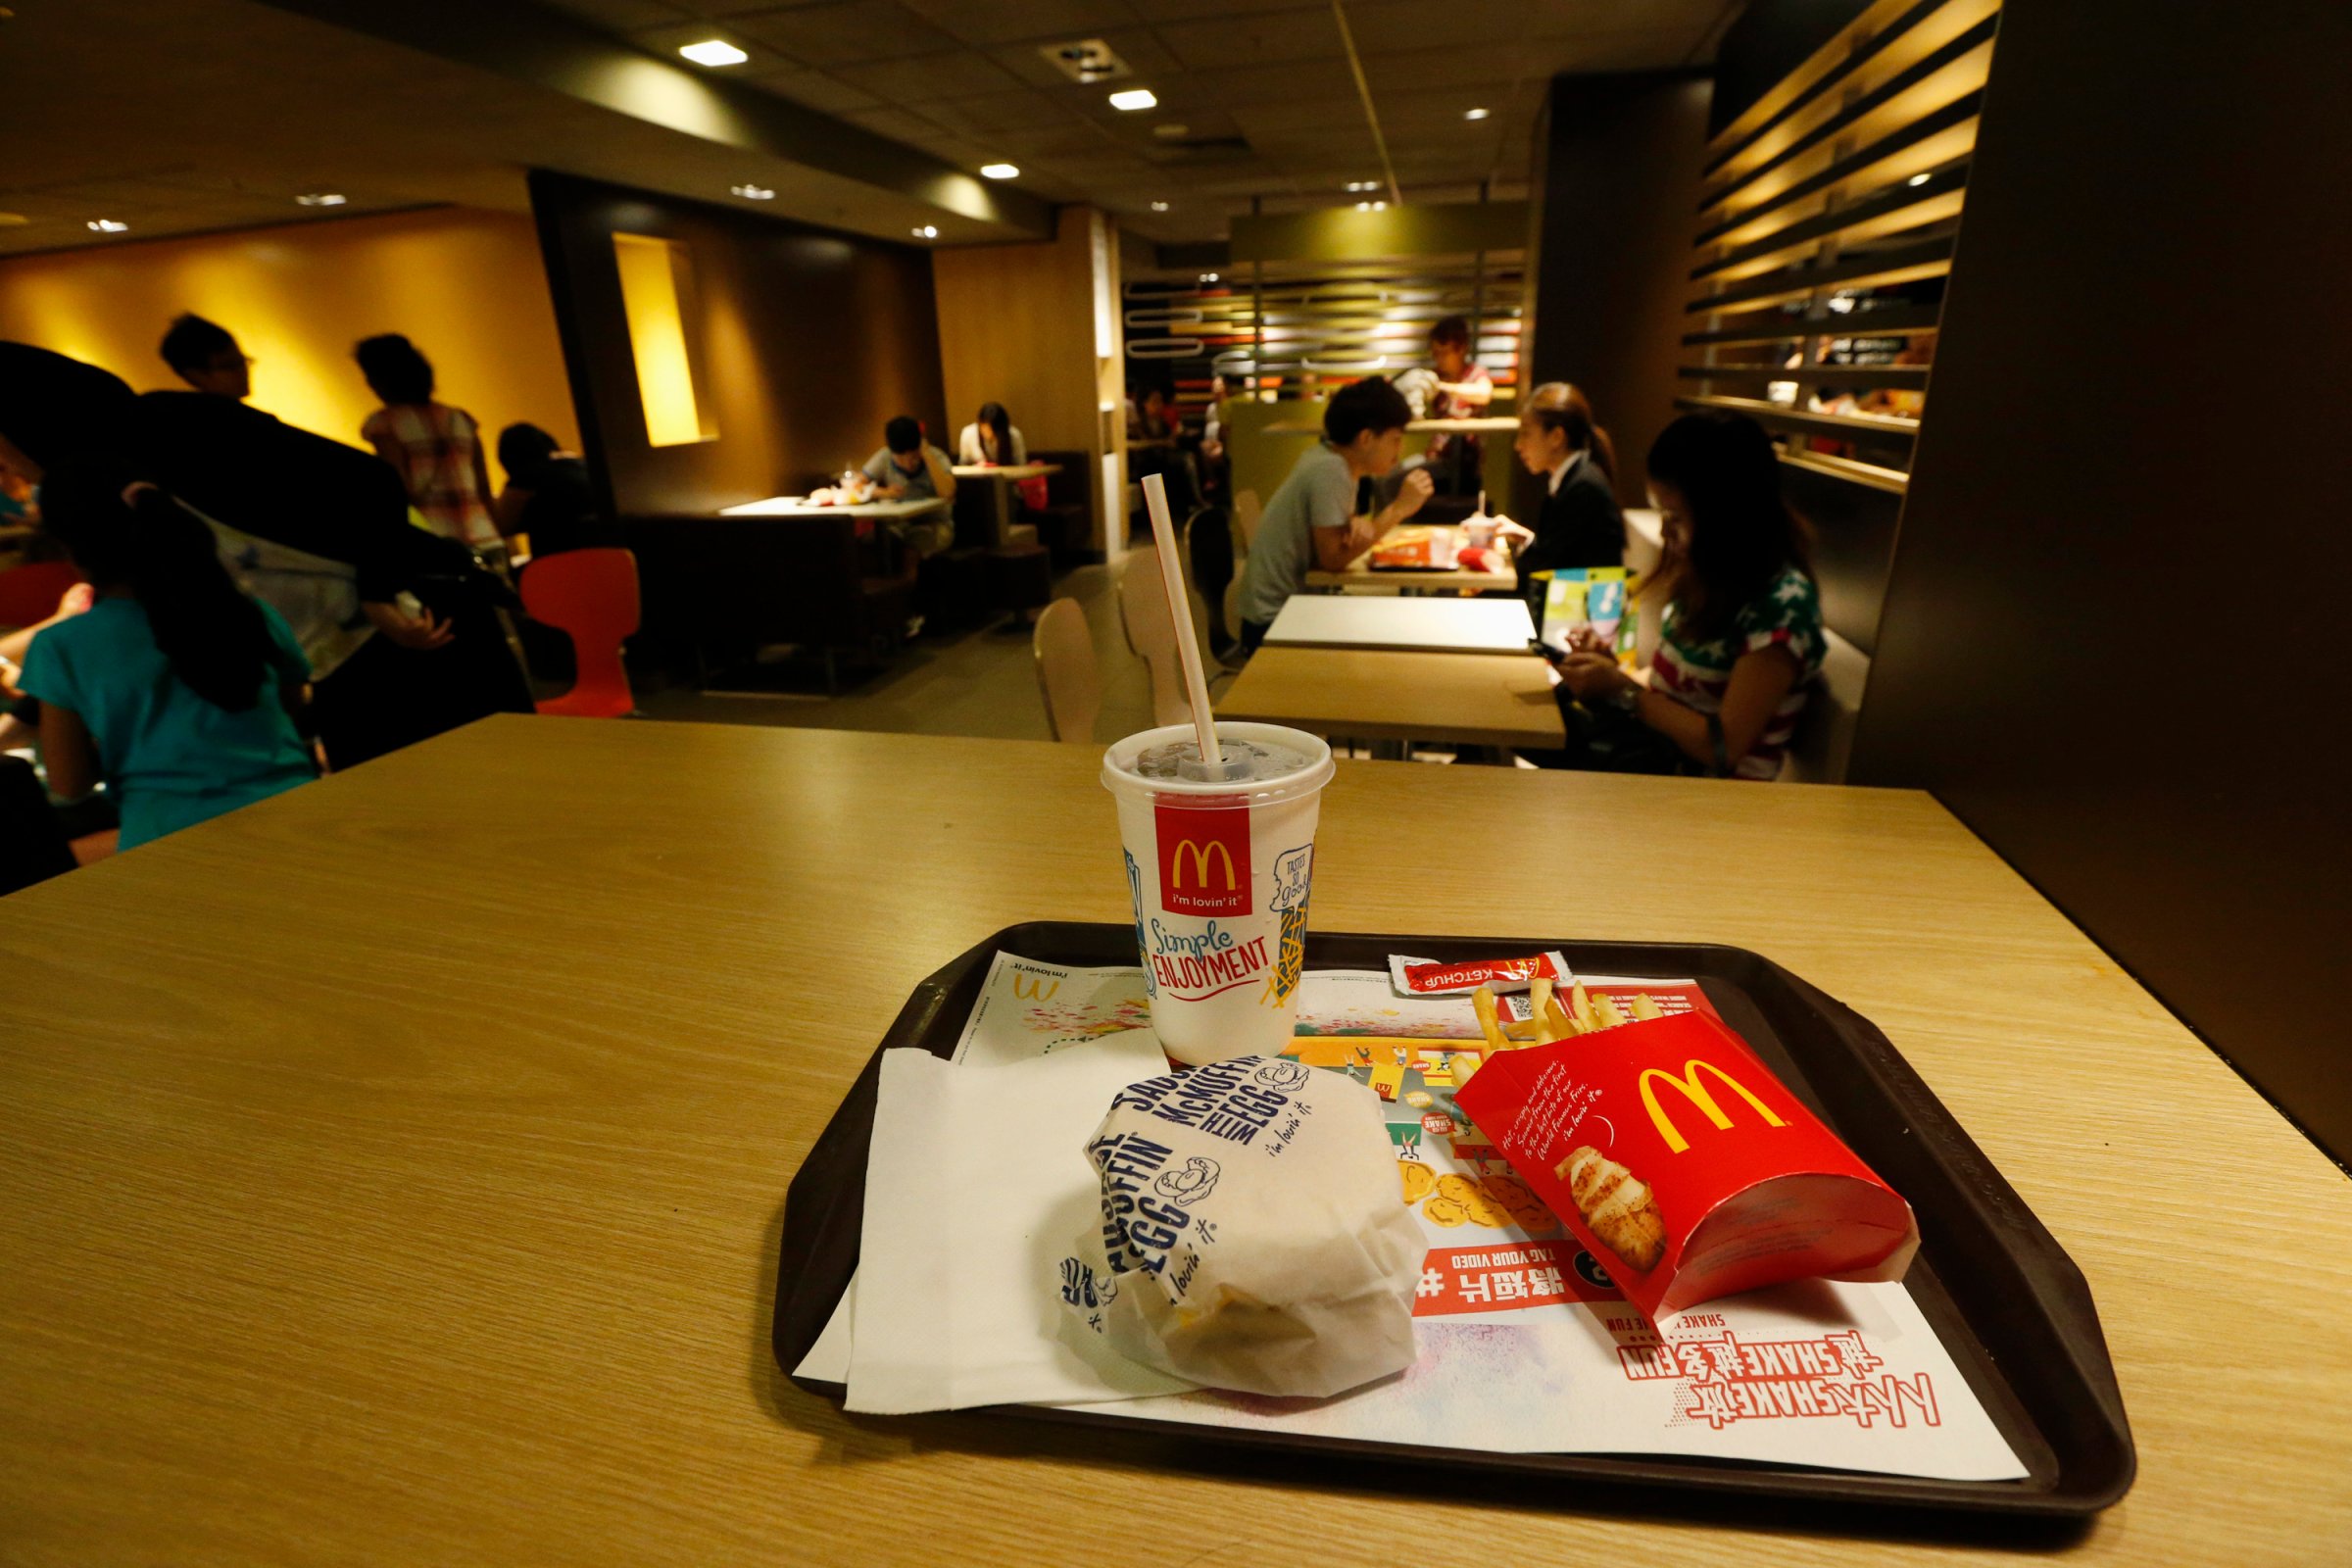 A burger set is displayed at a McDonald's restaurant in Hong Kong in this photo illustration